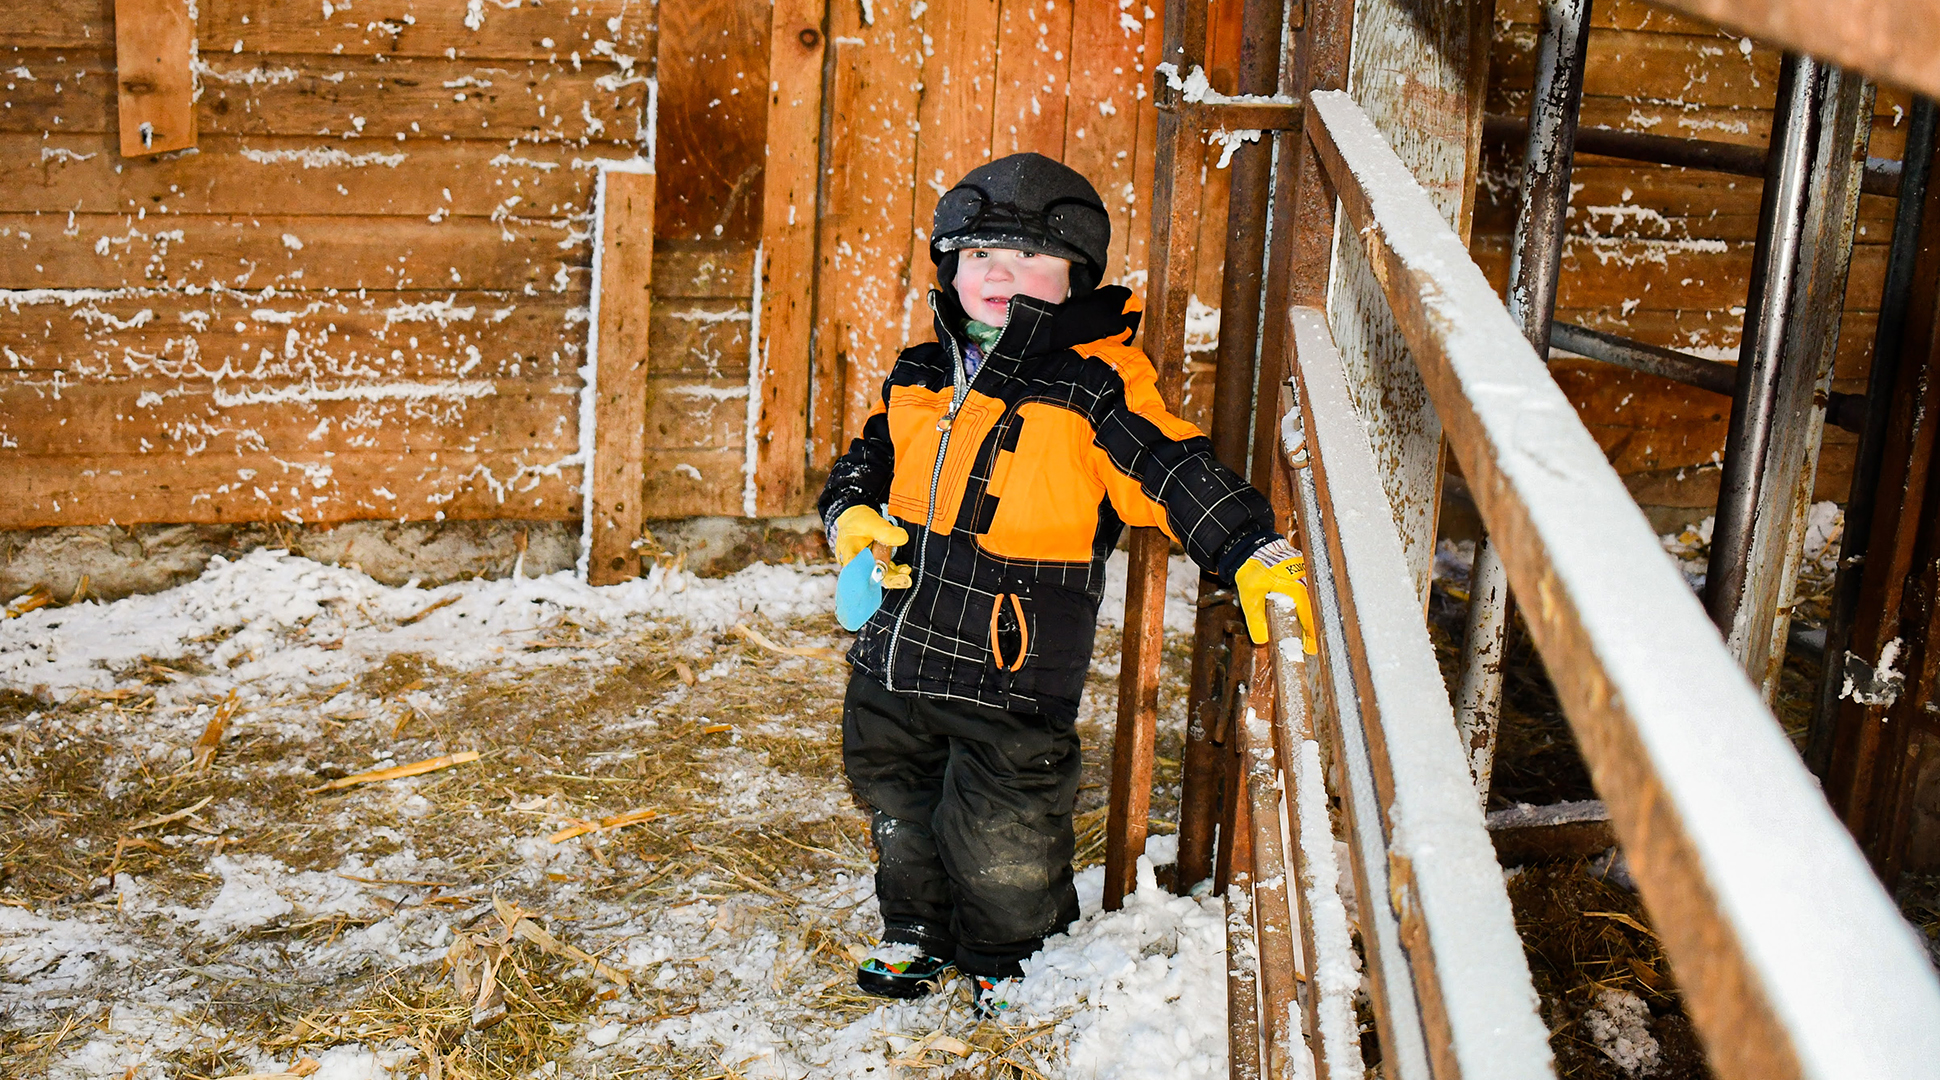 Surviving the winter with stir crazy ranch kids